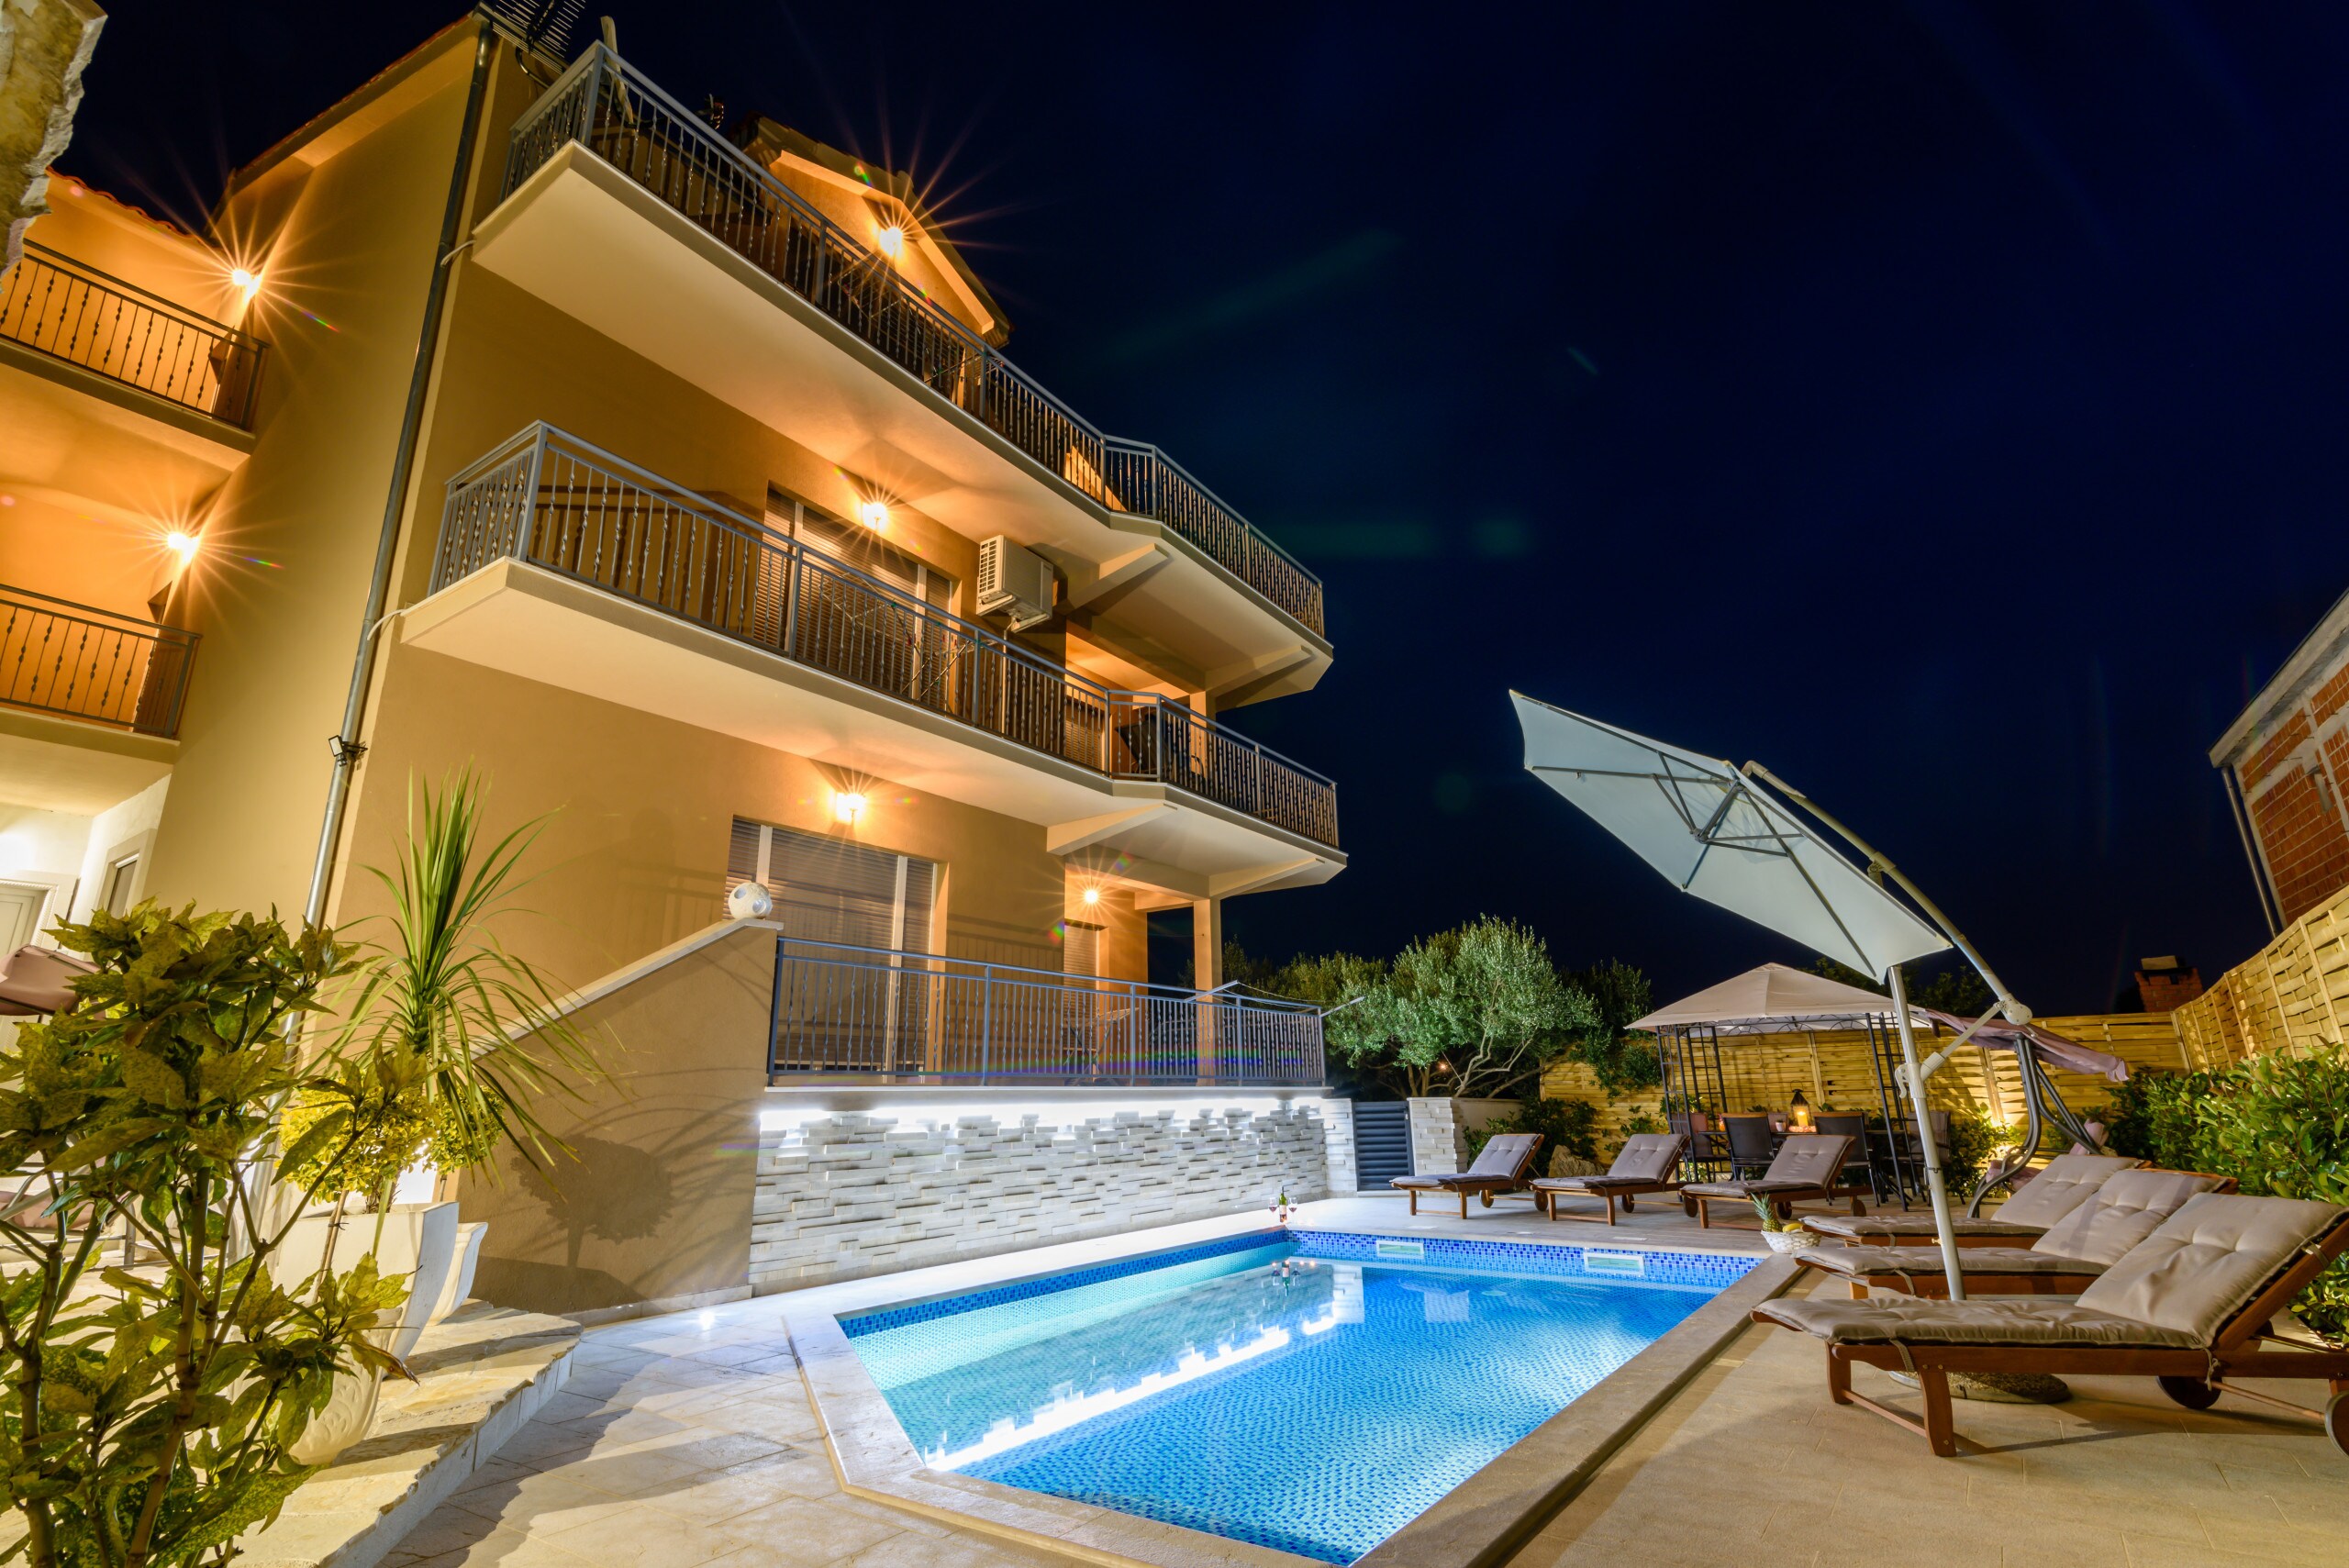 Property Image 1 - Poolincluded apartment Zadar